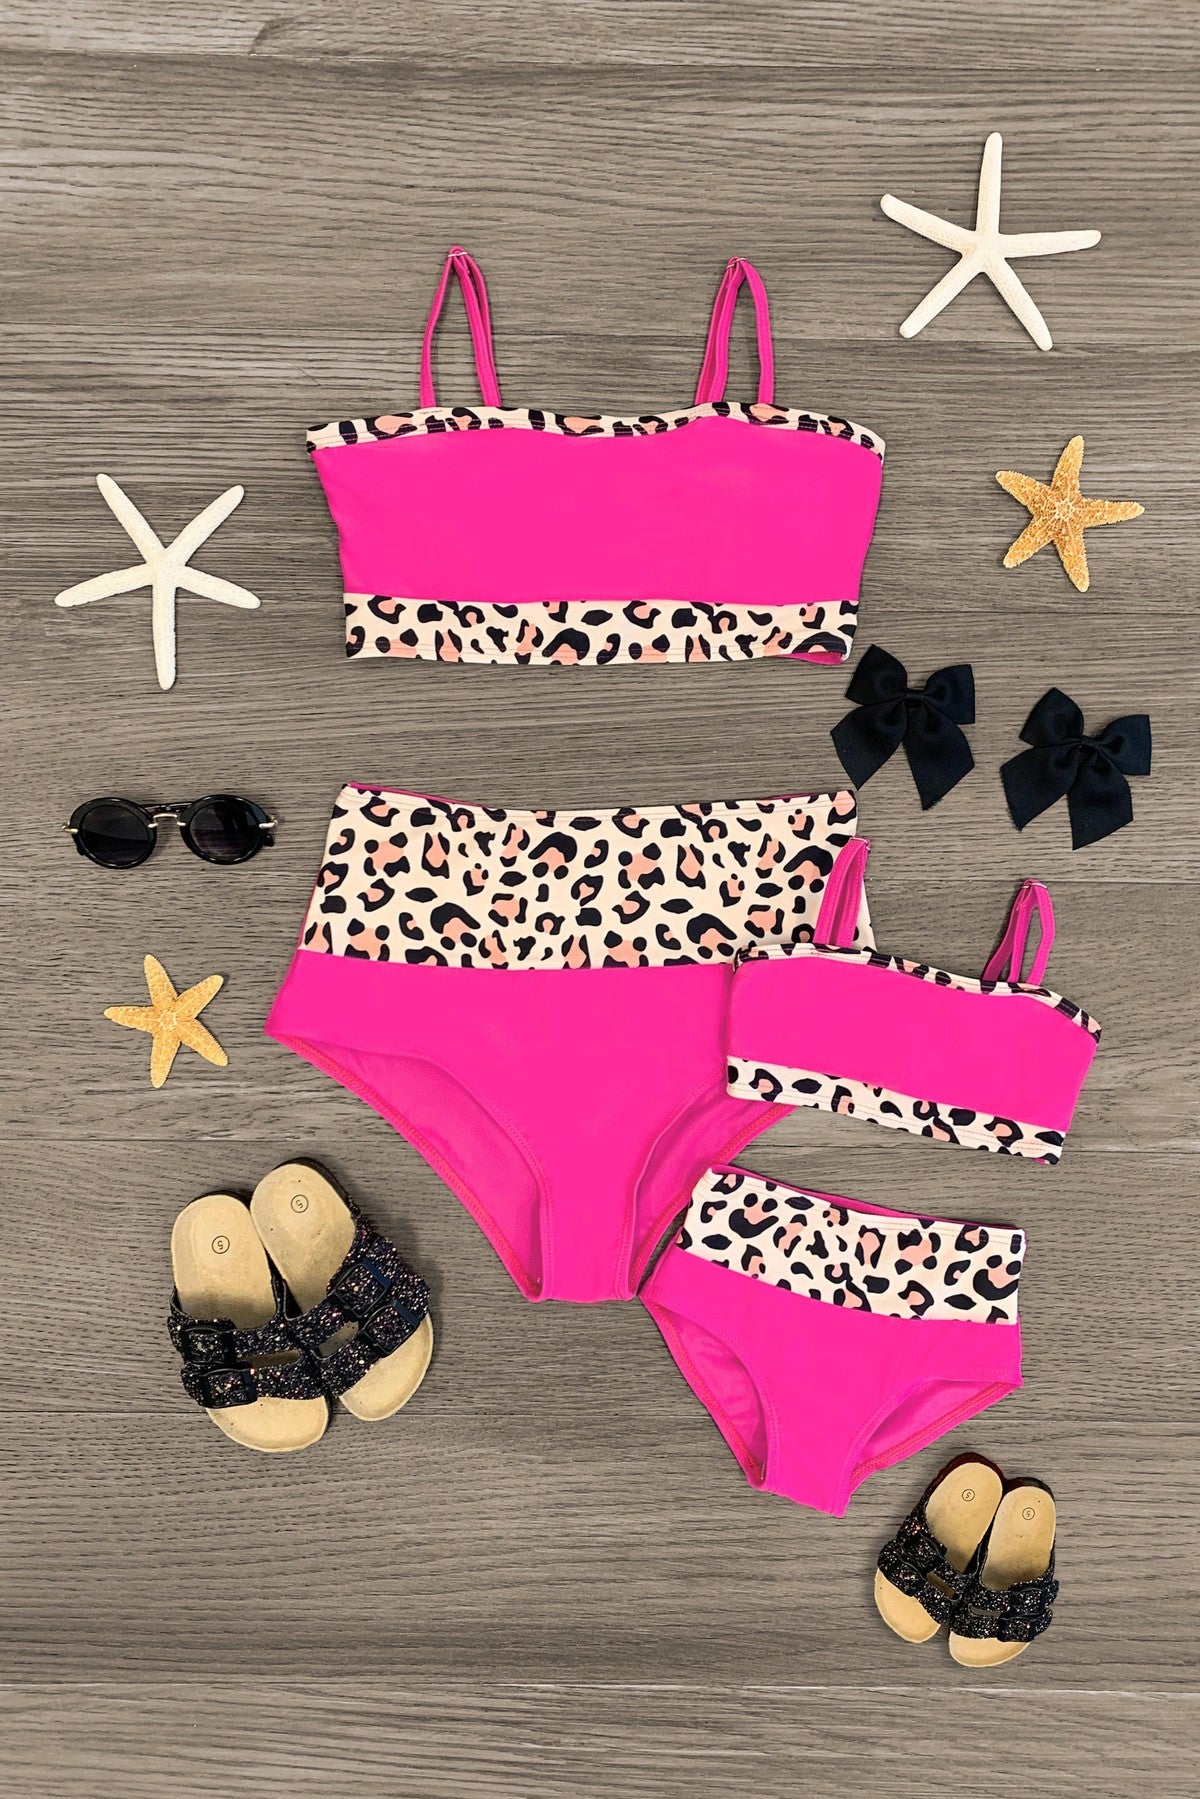 Leopard Print and Hot Pink: The Perfect Match